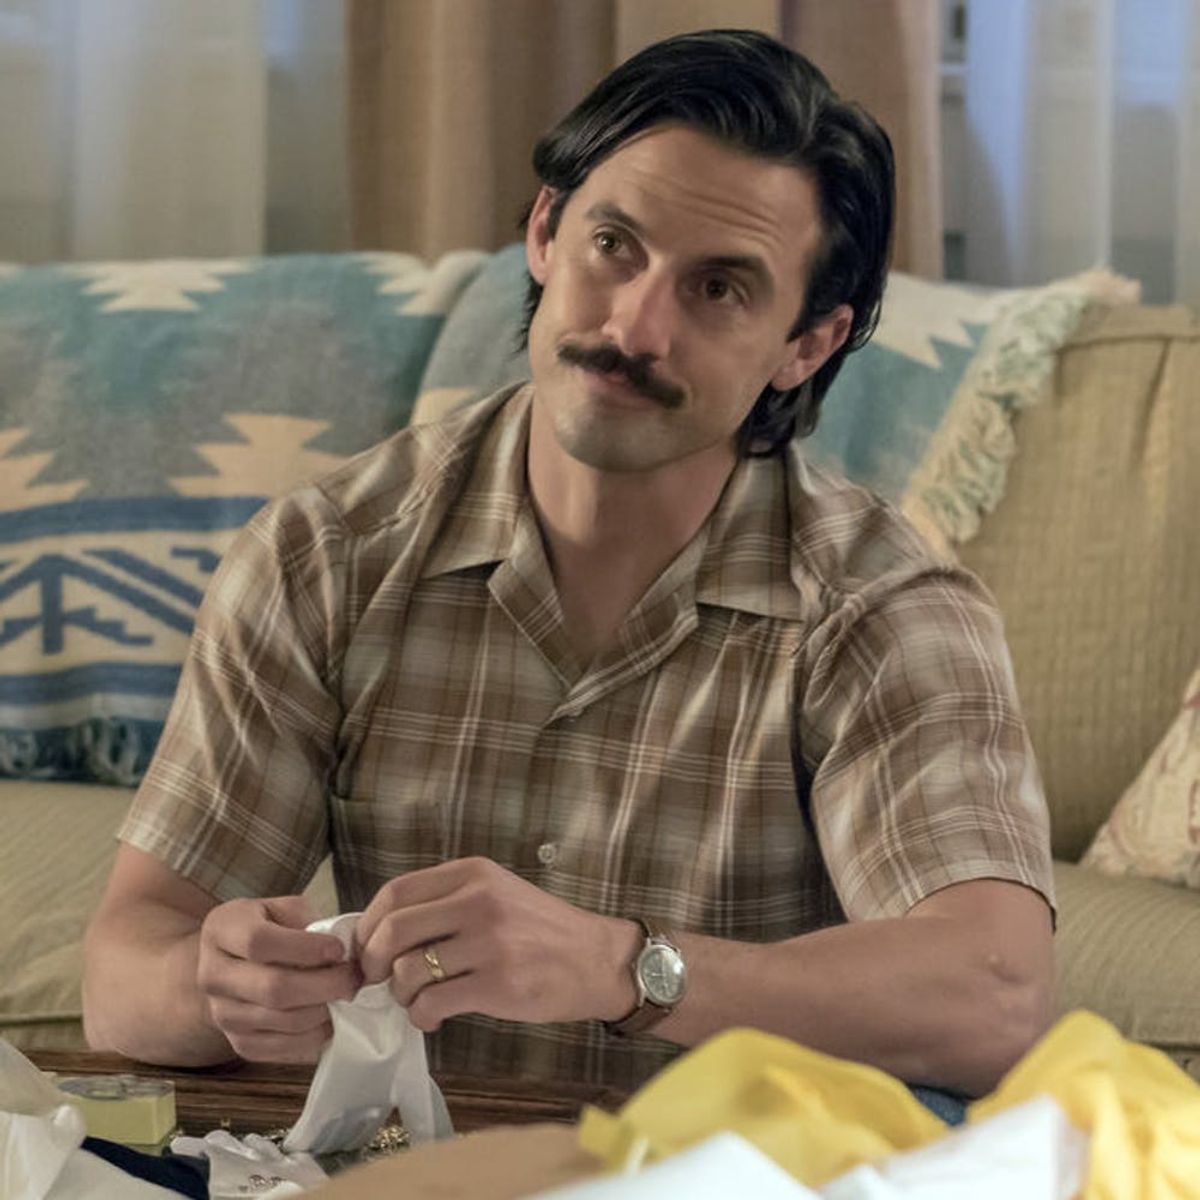 The Most Believable Theories About Jack’s Death on “This Is Us”